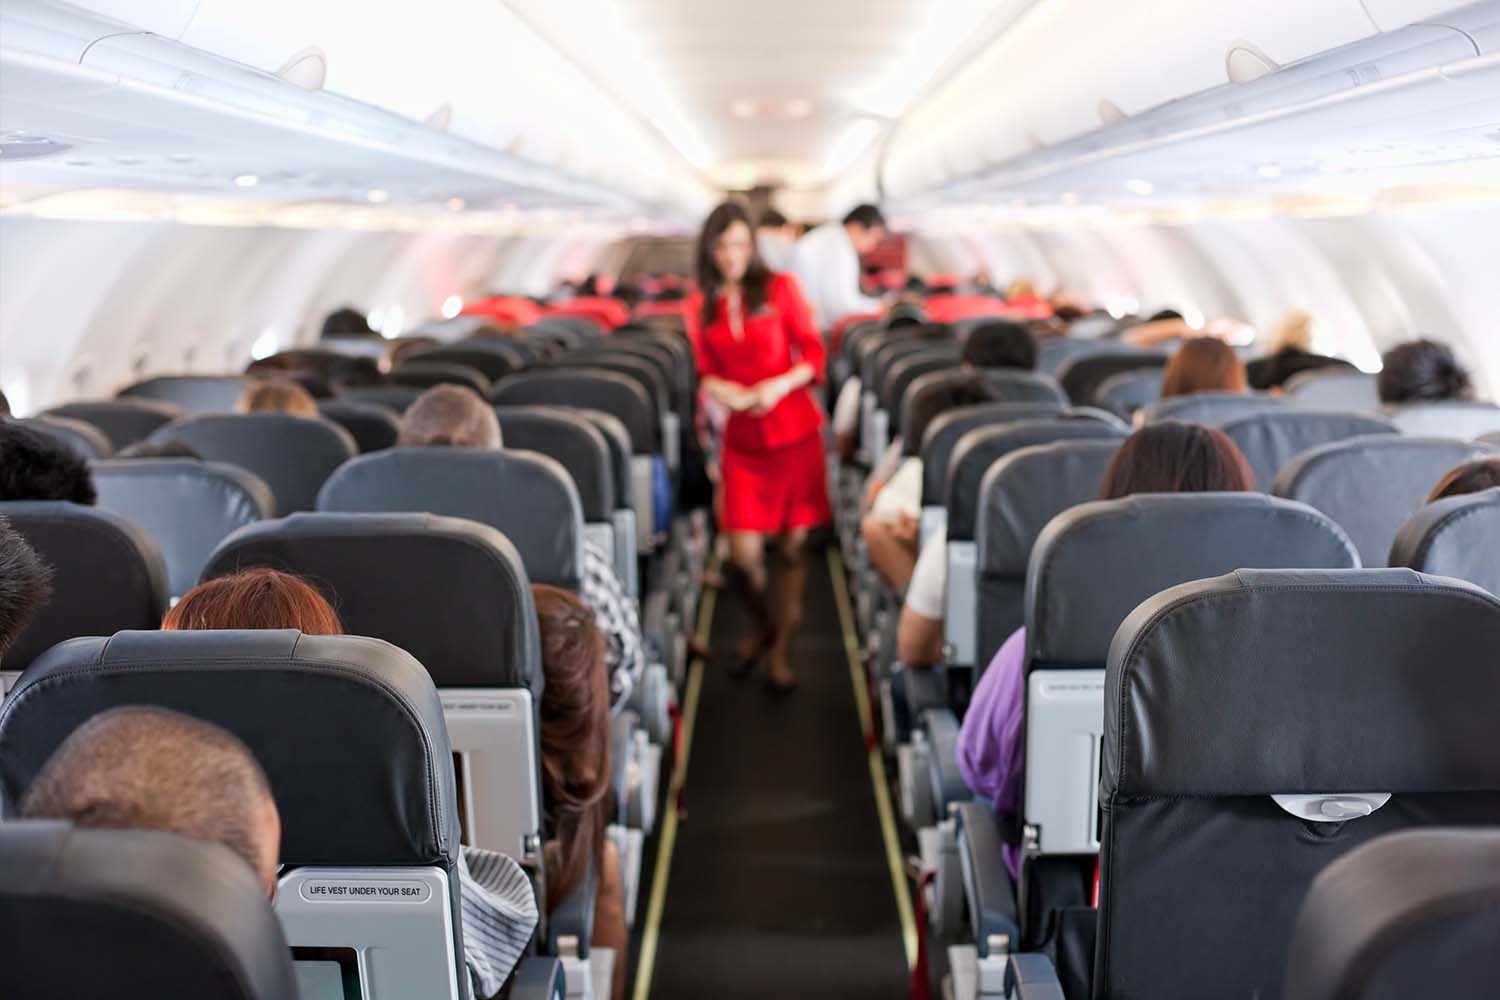 A flight attendant in the middle of an aisle on an airplane. Here's why flight attendants won't help you with your carry-on bags.